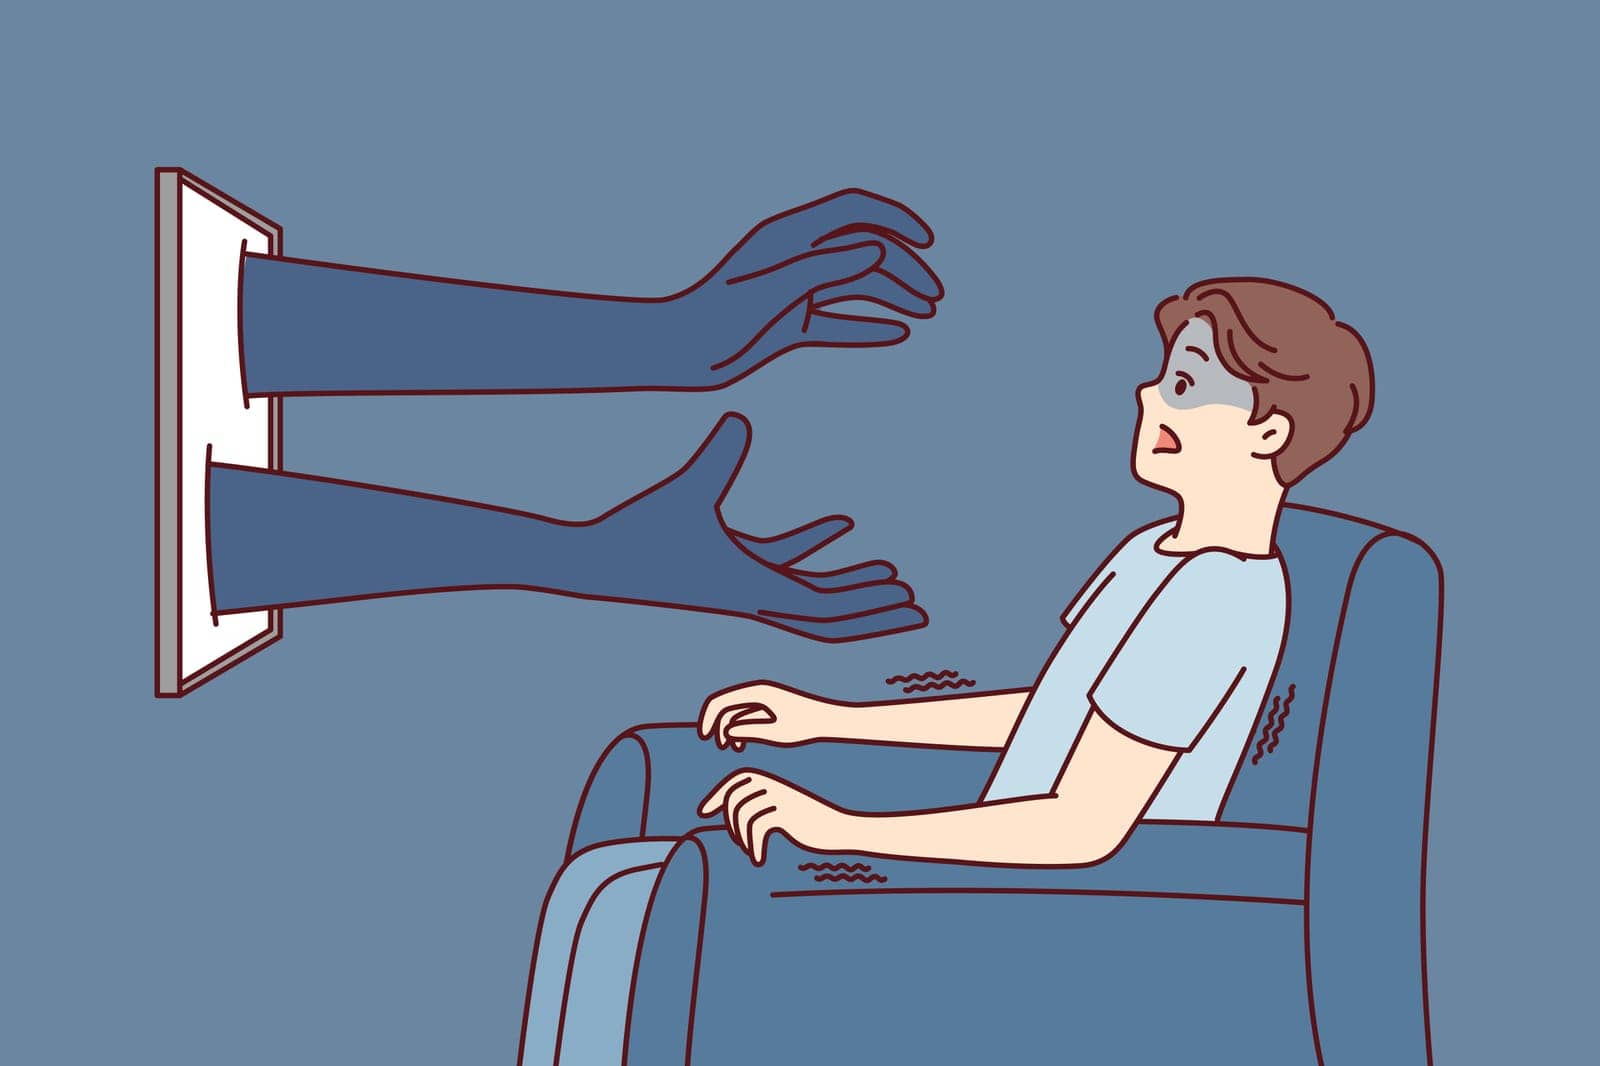 Man sitting in chair in front of TV gets scared sees hands reaching out from display. Vector image by Vasilyeva